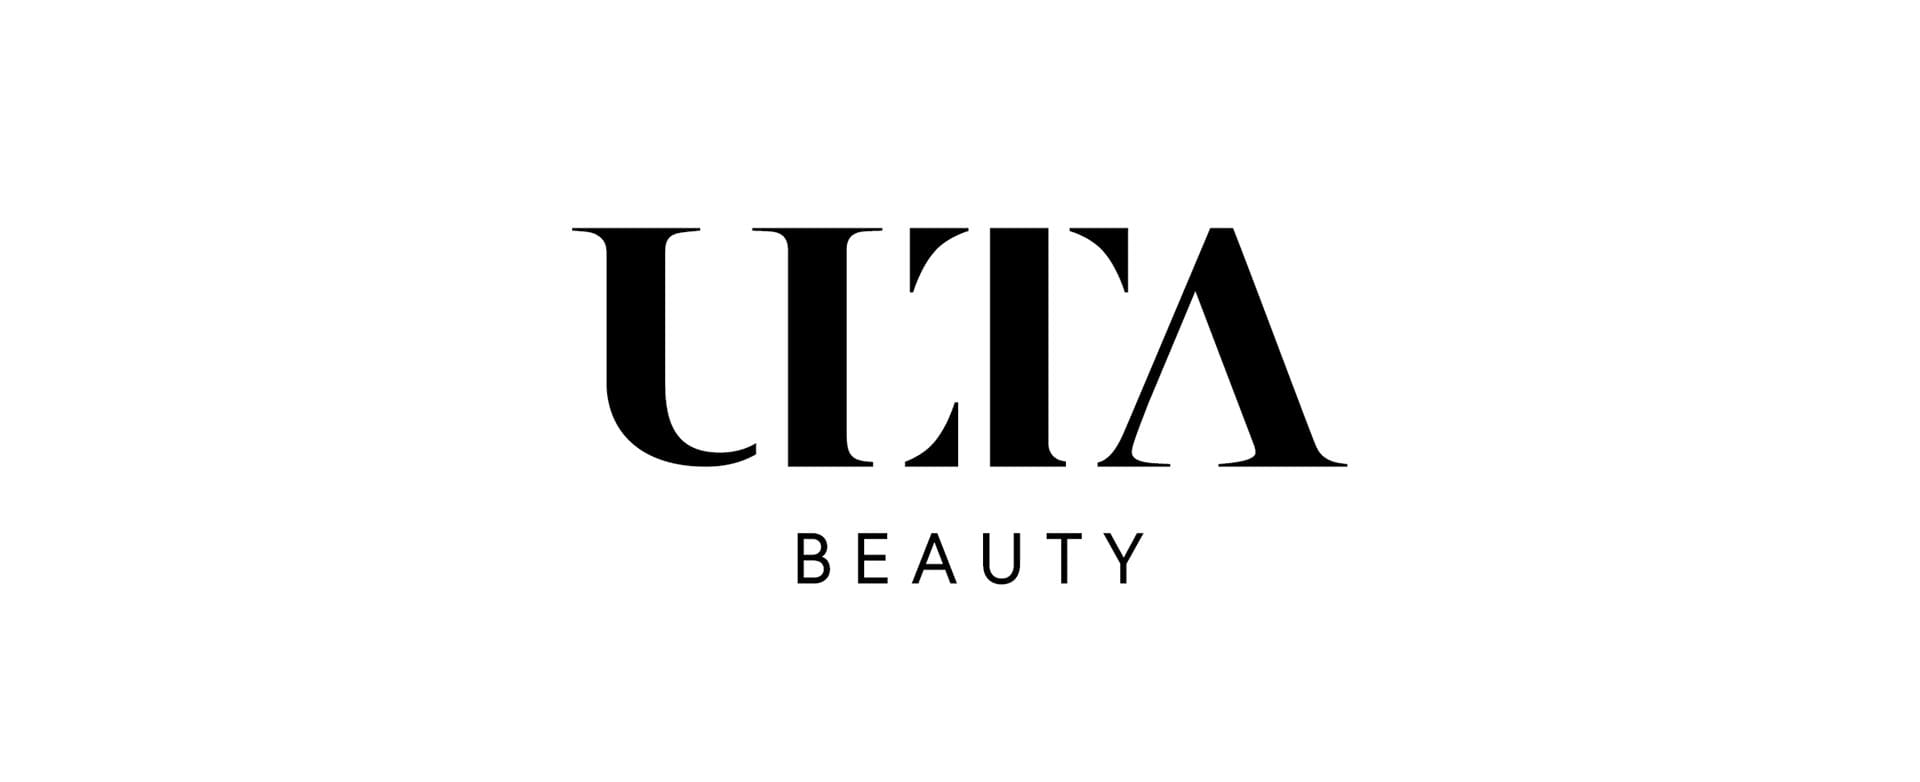 The logo for Uta Beauty, inspired by the glamping experience.